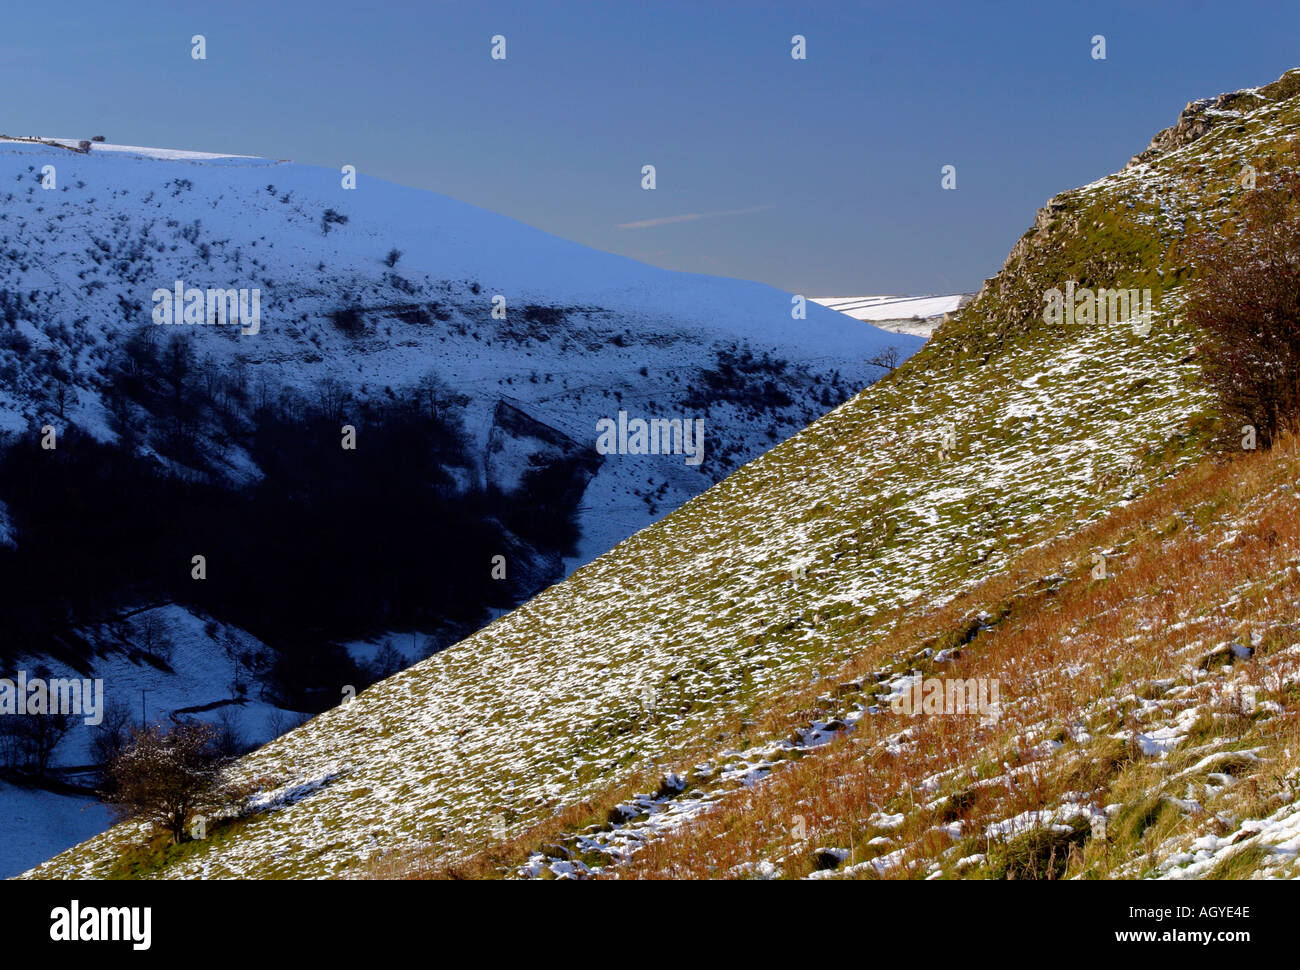 Snow covered landscape near Monsal Head in the Derbyshire Peak District England UK Stock Photo